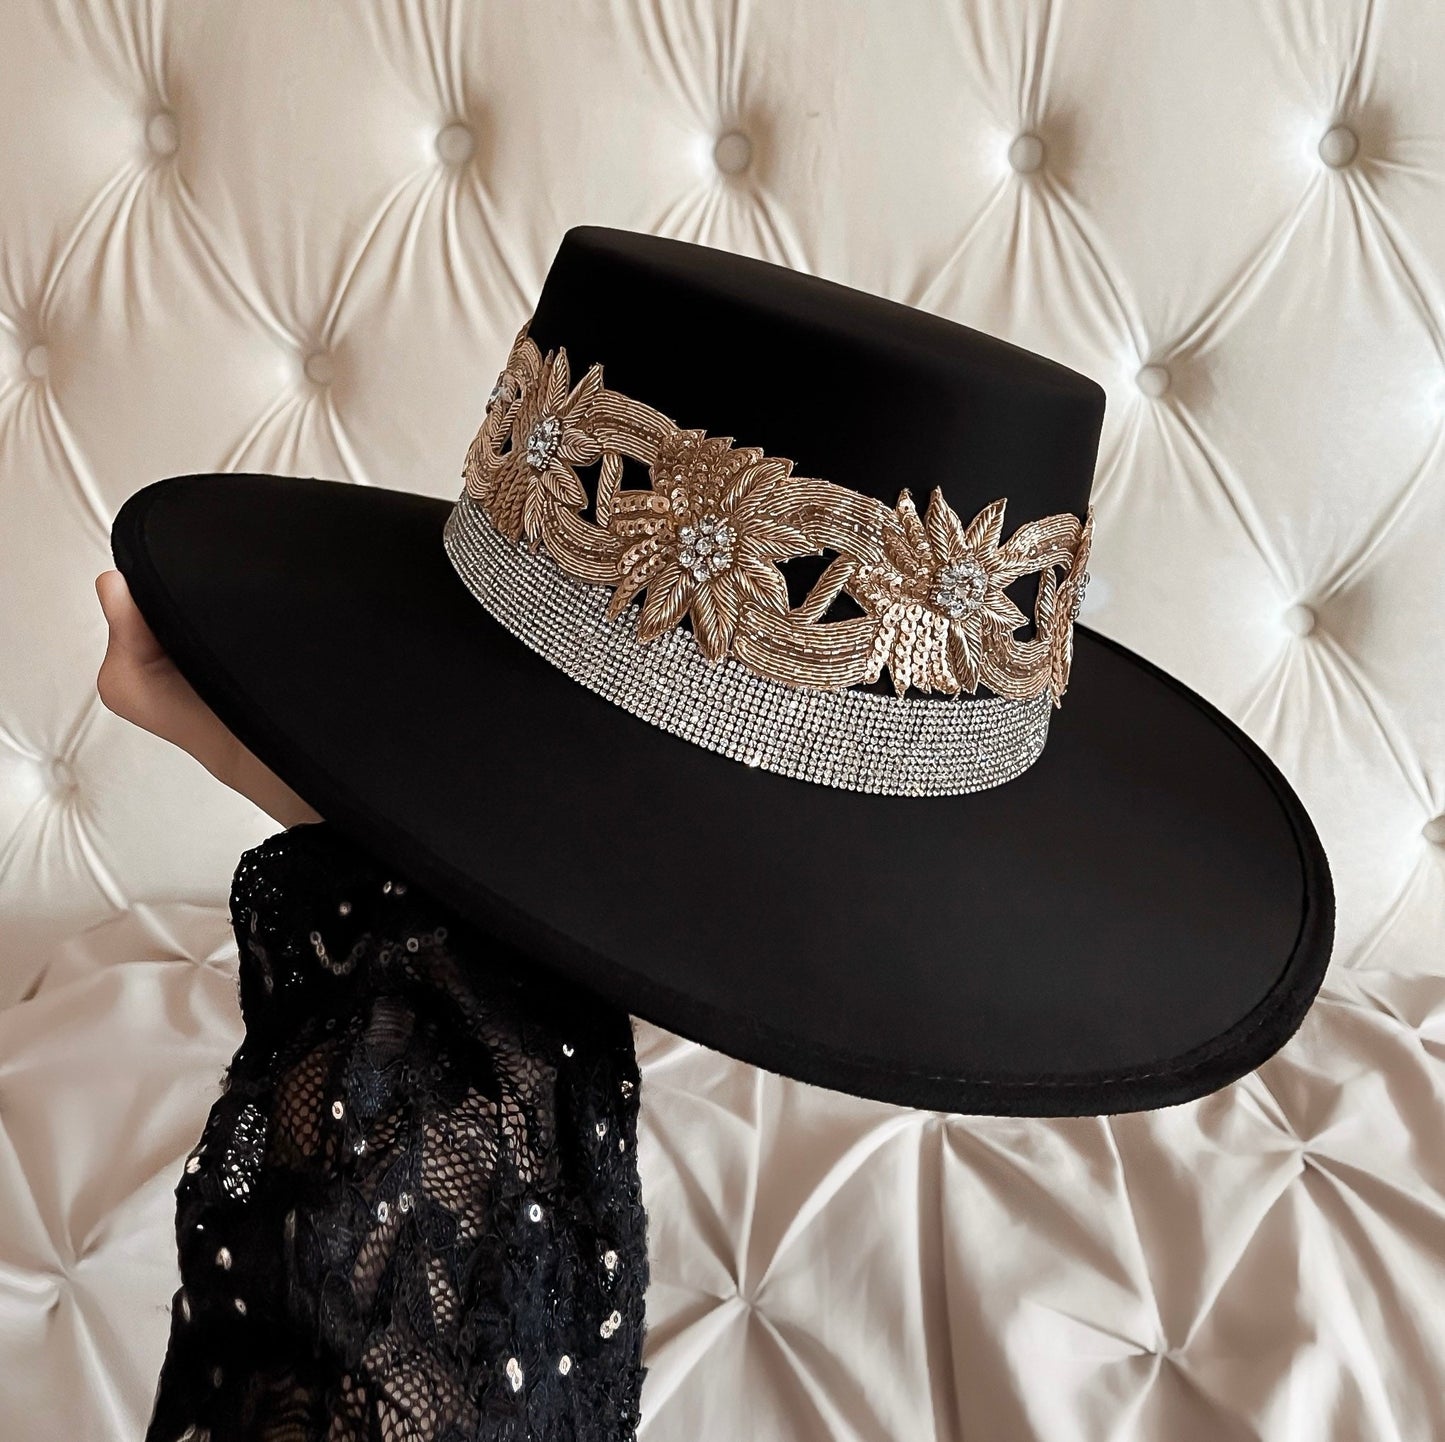 “THE BRIDE” luxury boater hat in black/gold/silver